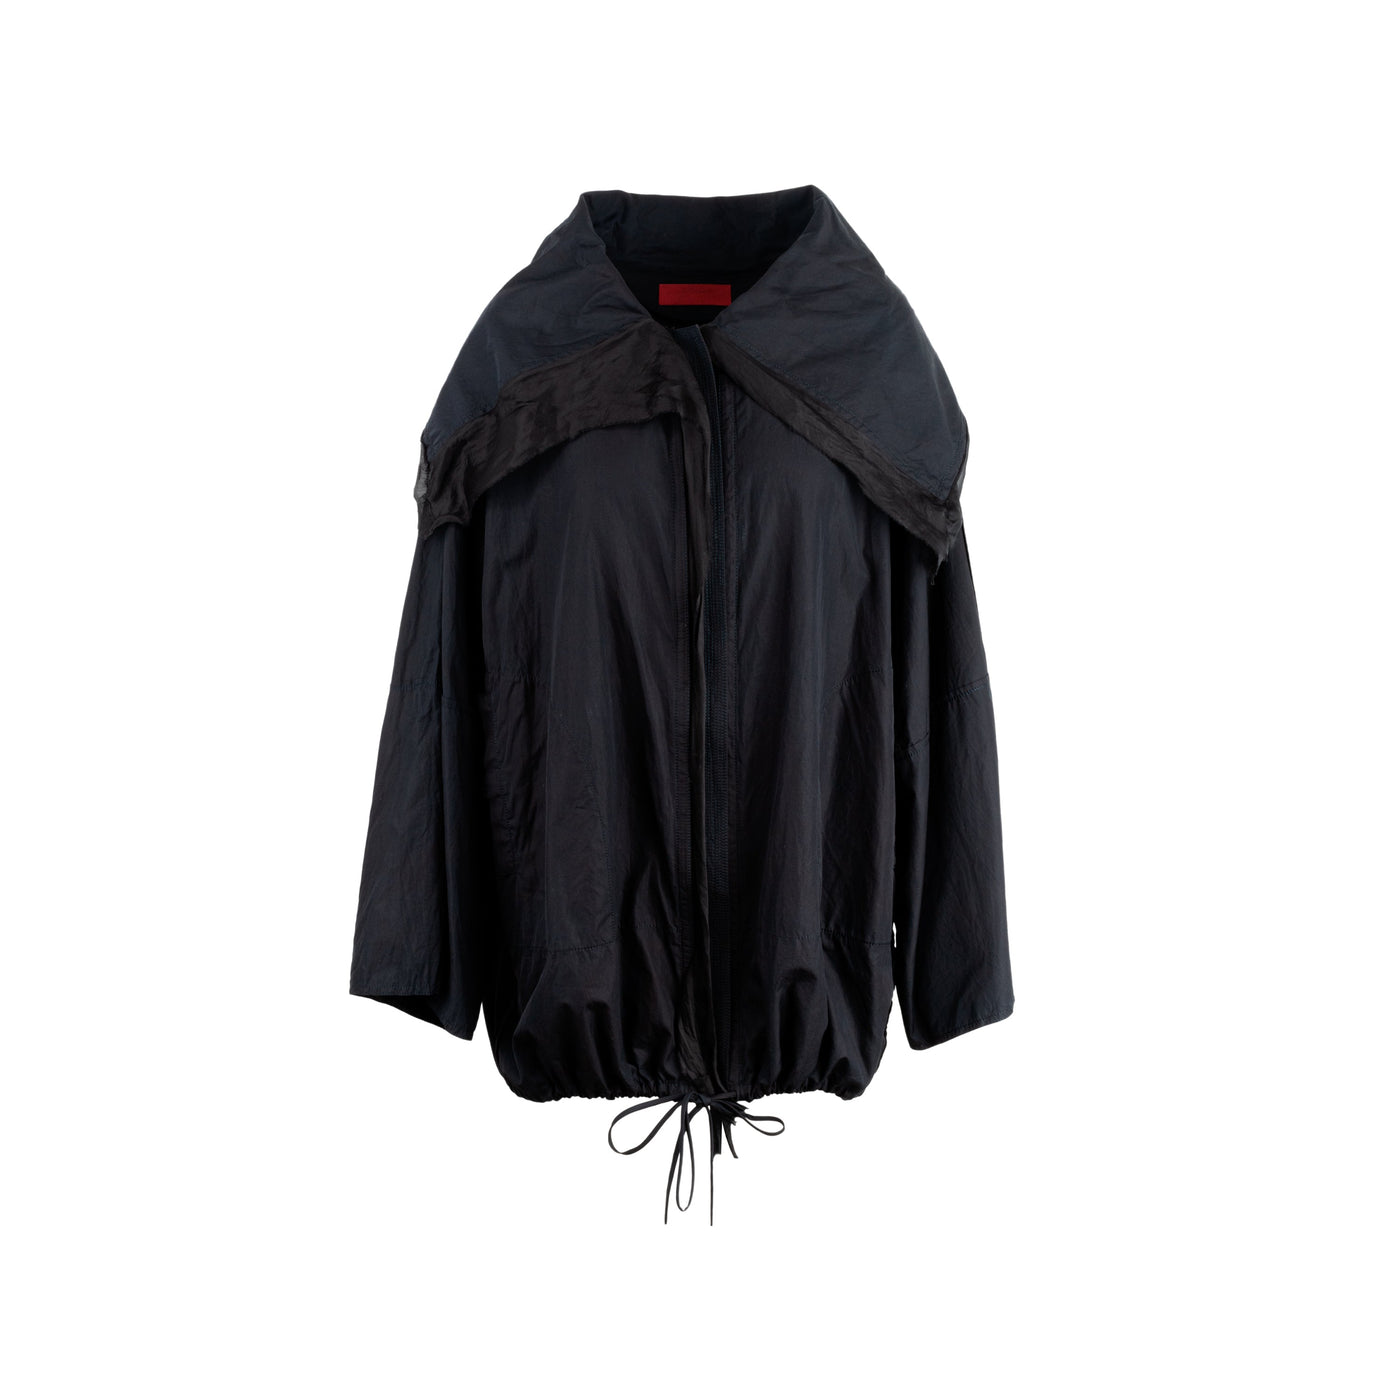 Diliborio black silk organza jacket. Oversized fit with long sleeves, maxi collar and drawstring at the bottom pre-owned